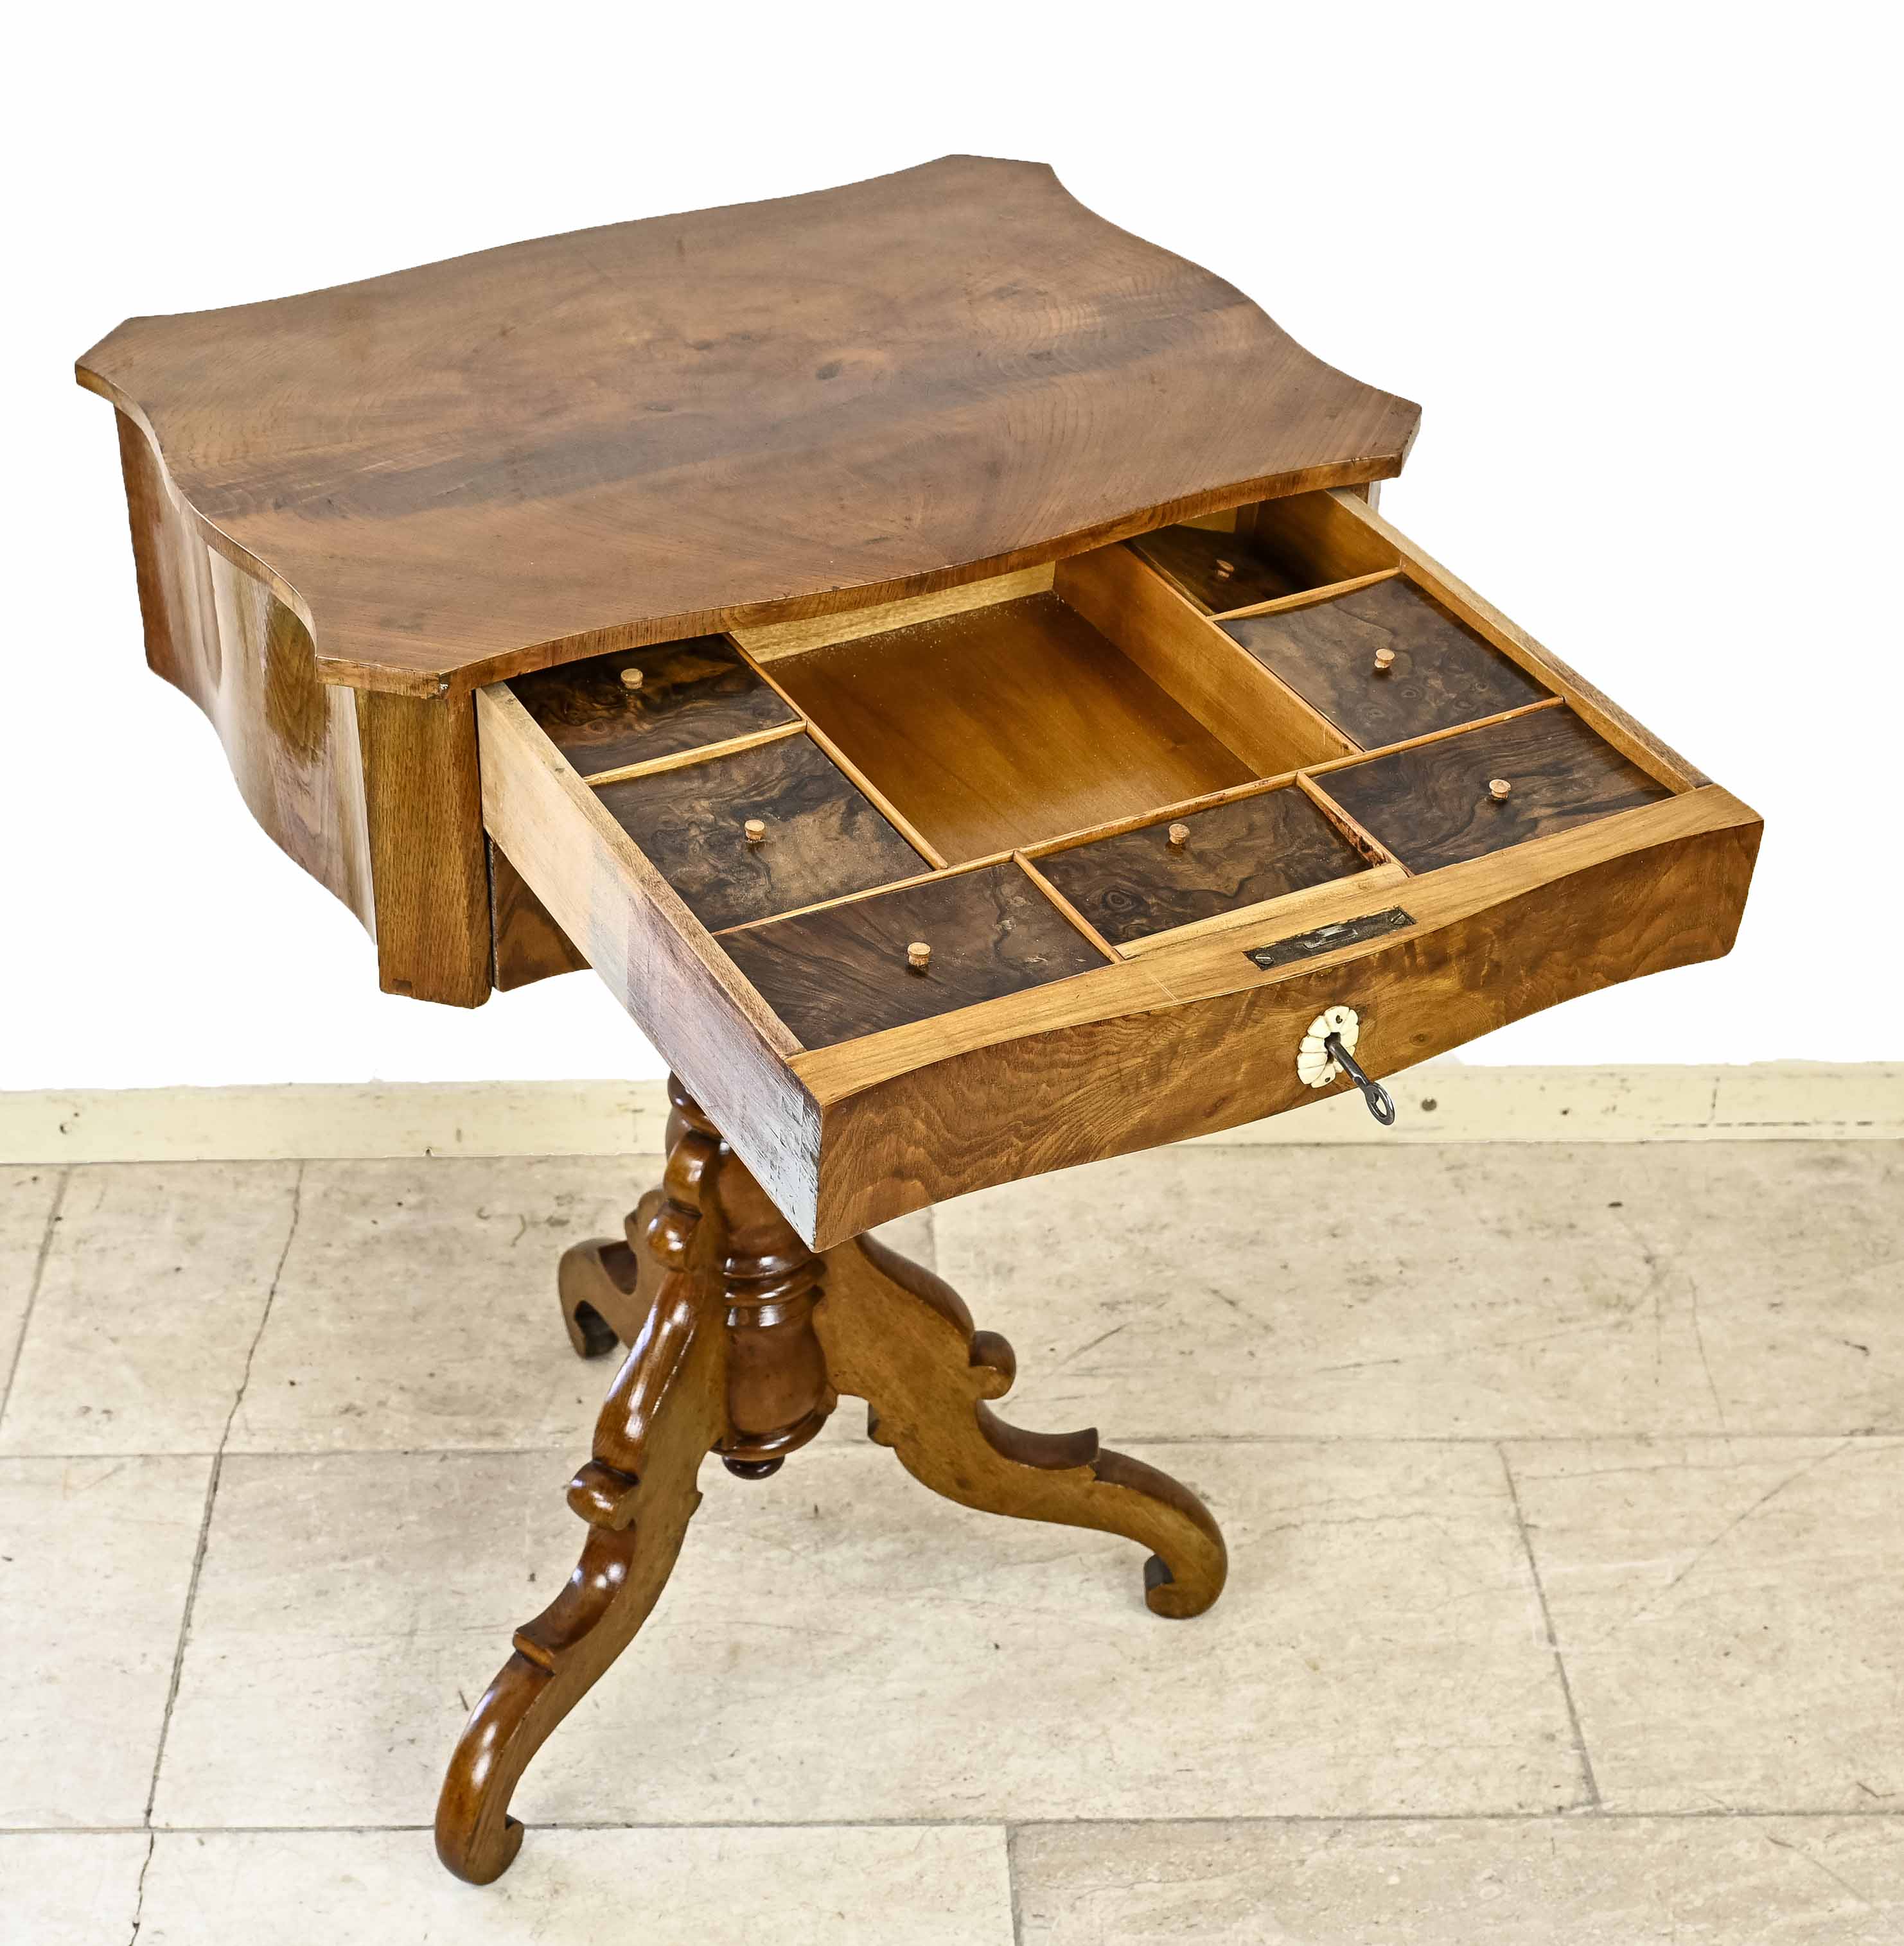 German sewing table, 1850 - Image 2 of 2